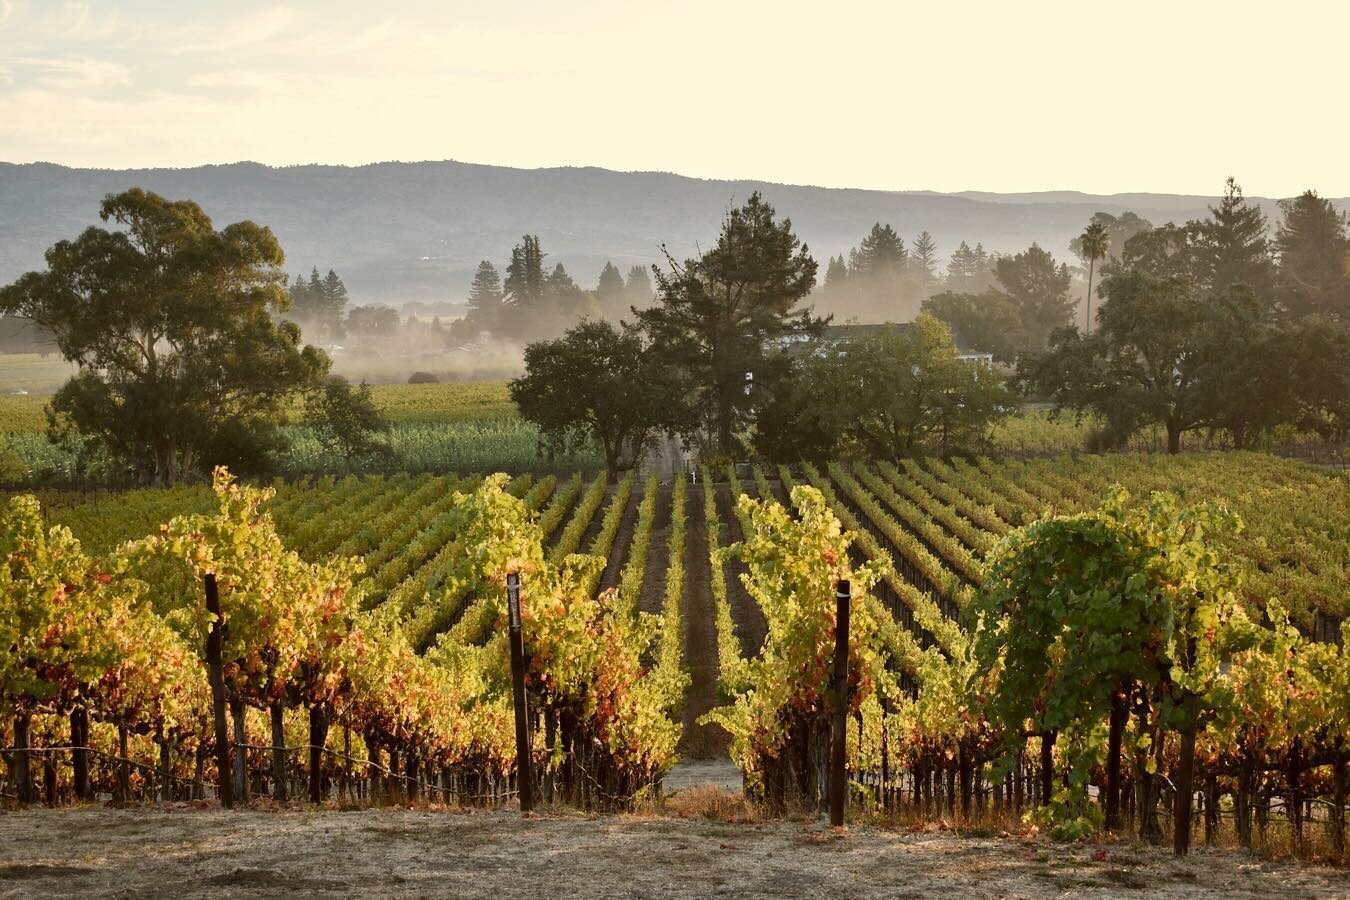 Here&rsquo;s a look at one of the vineyards we source Cab fruit from in the Oak Knoll AVA of Napa Valley. Oak Knoll is a cooler environment with marine fog that hangs in the morning air. We have warm summer days and cool nights. The grapes grow in vo